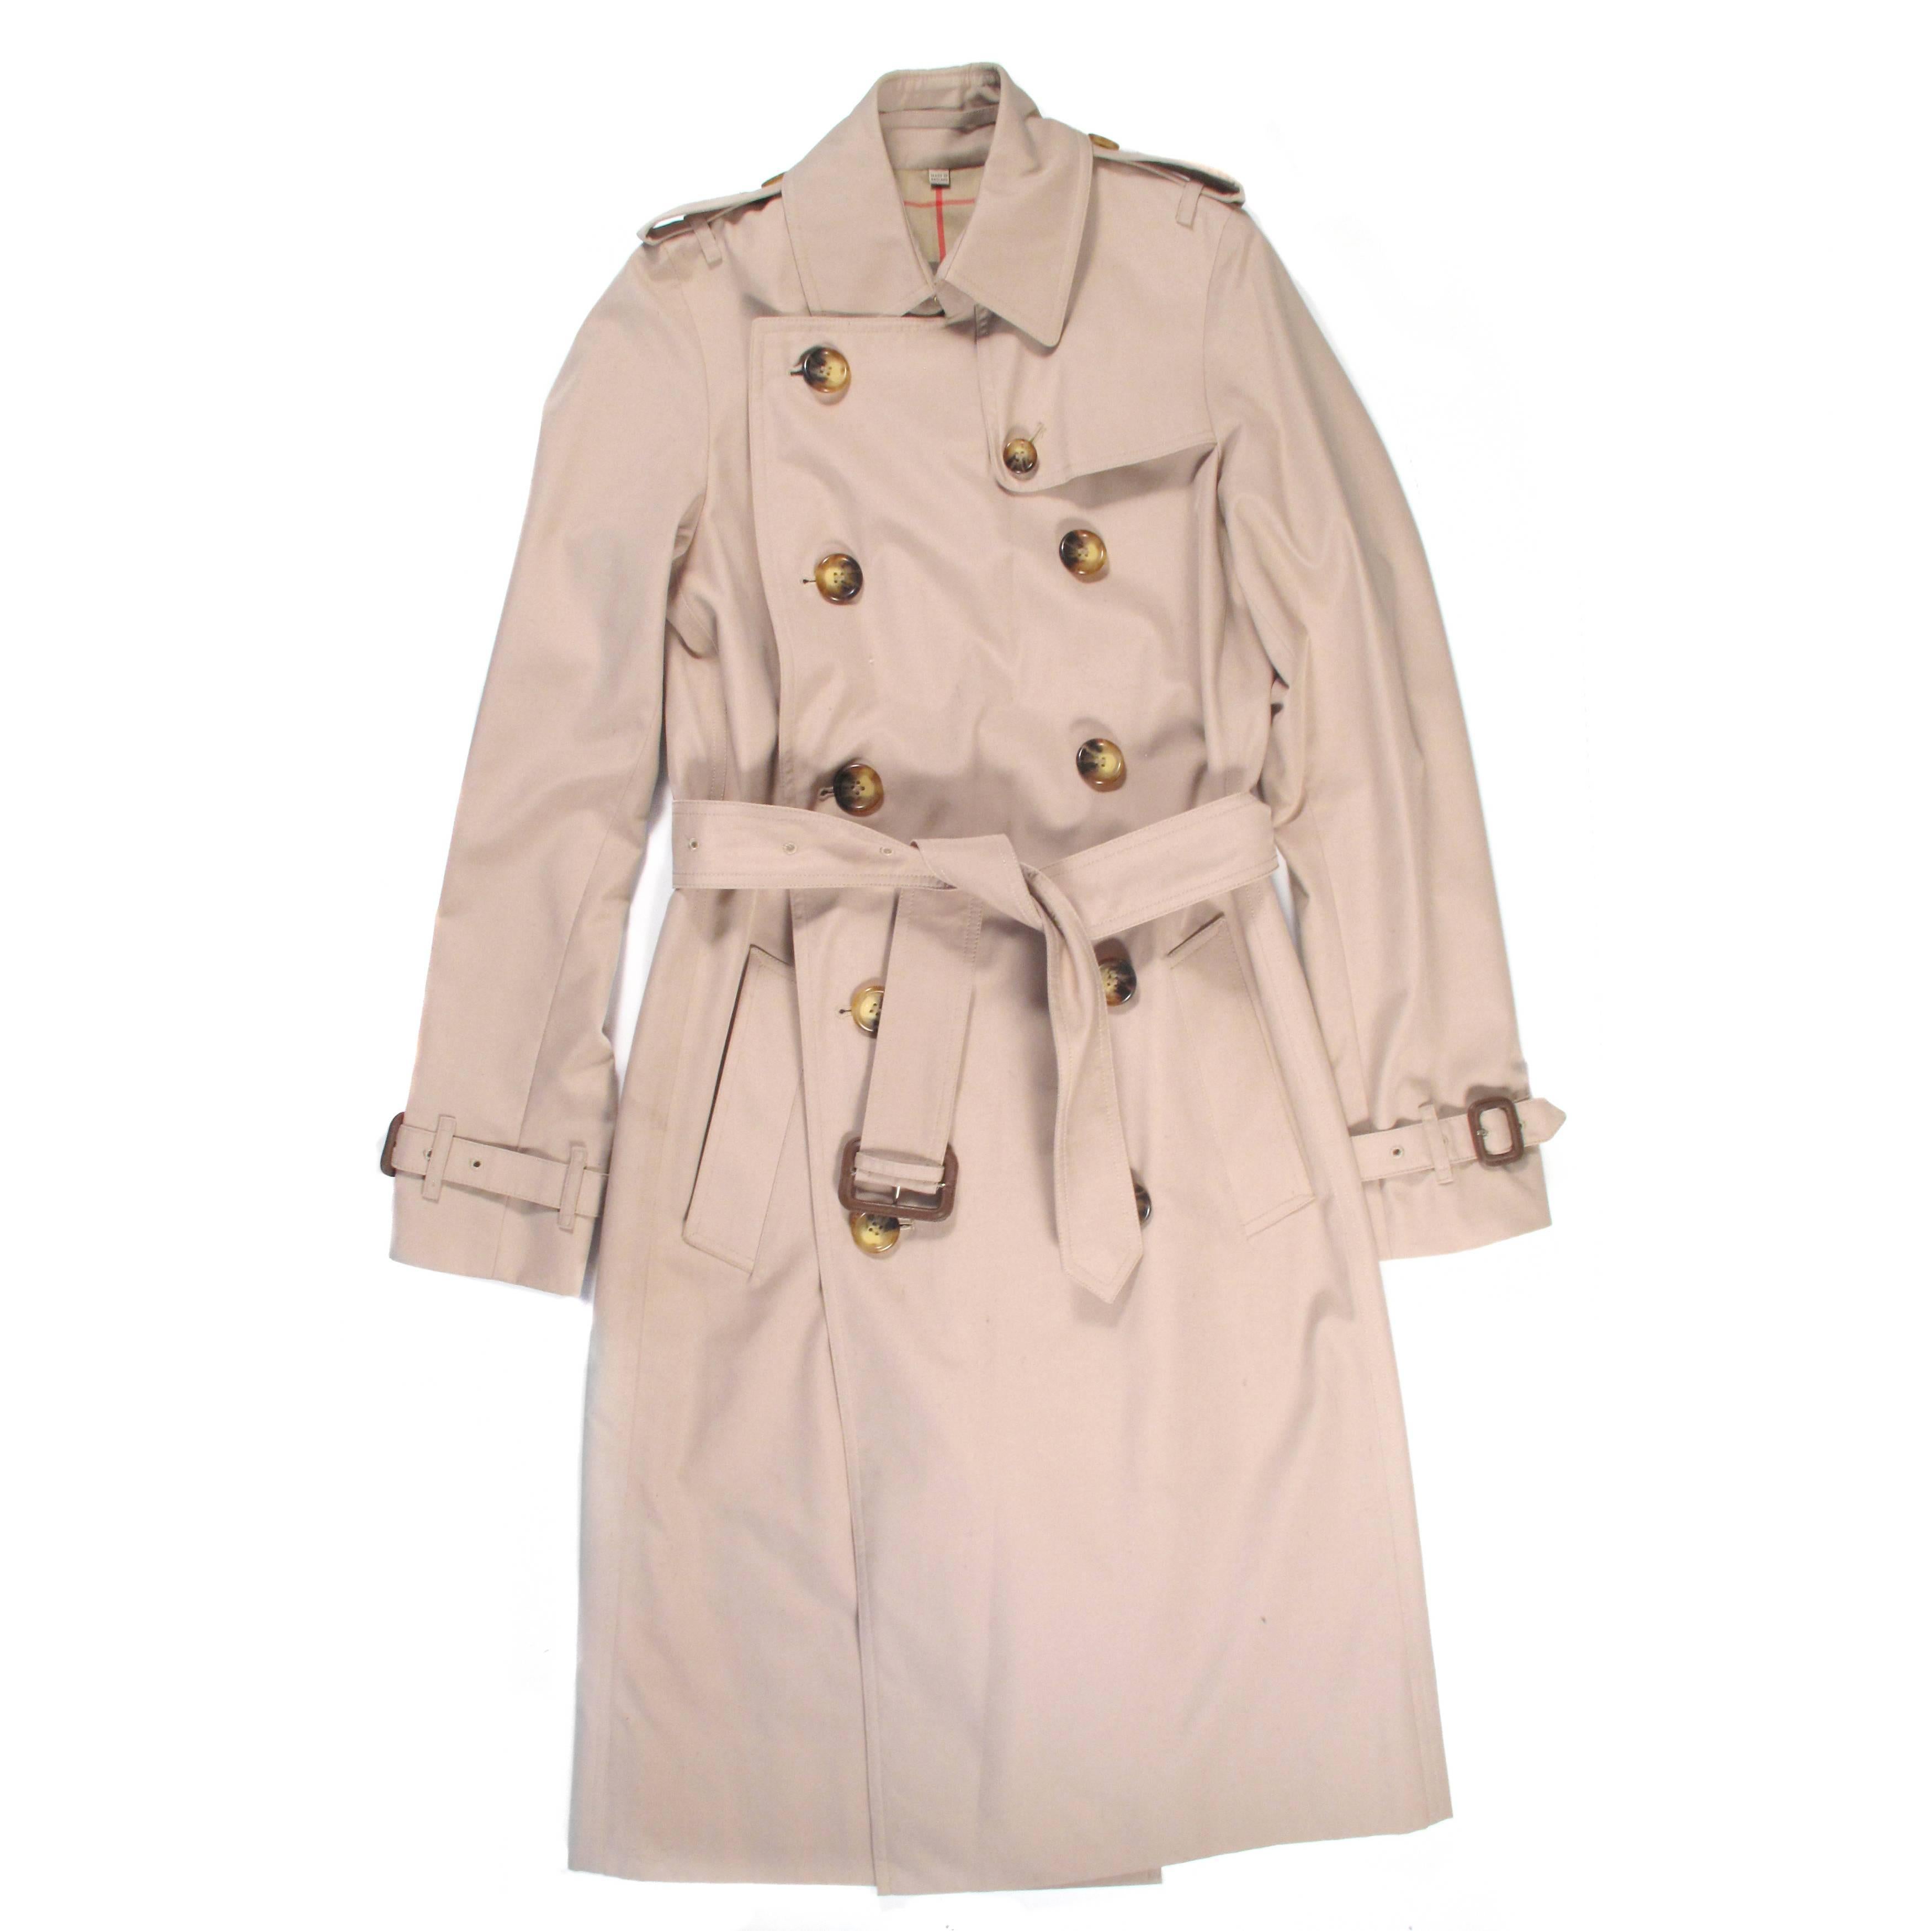 Burberry Trench Coat - 2 / 4 - 34 - 36 - Tan Belted Jacket Cotton London